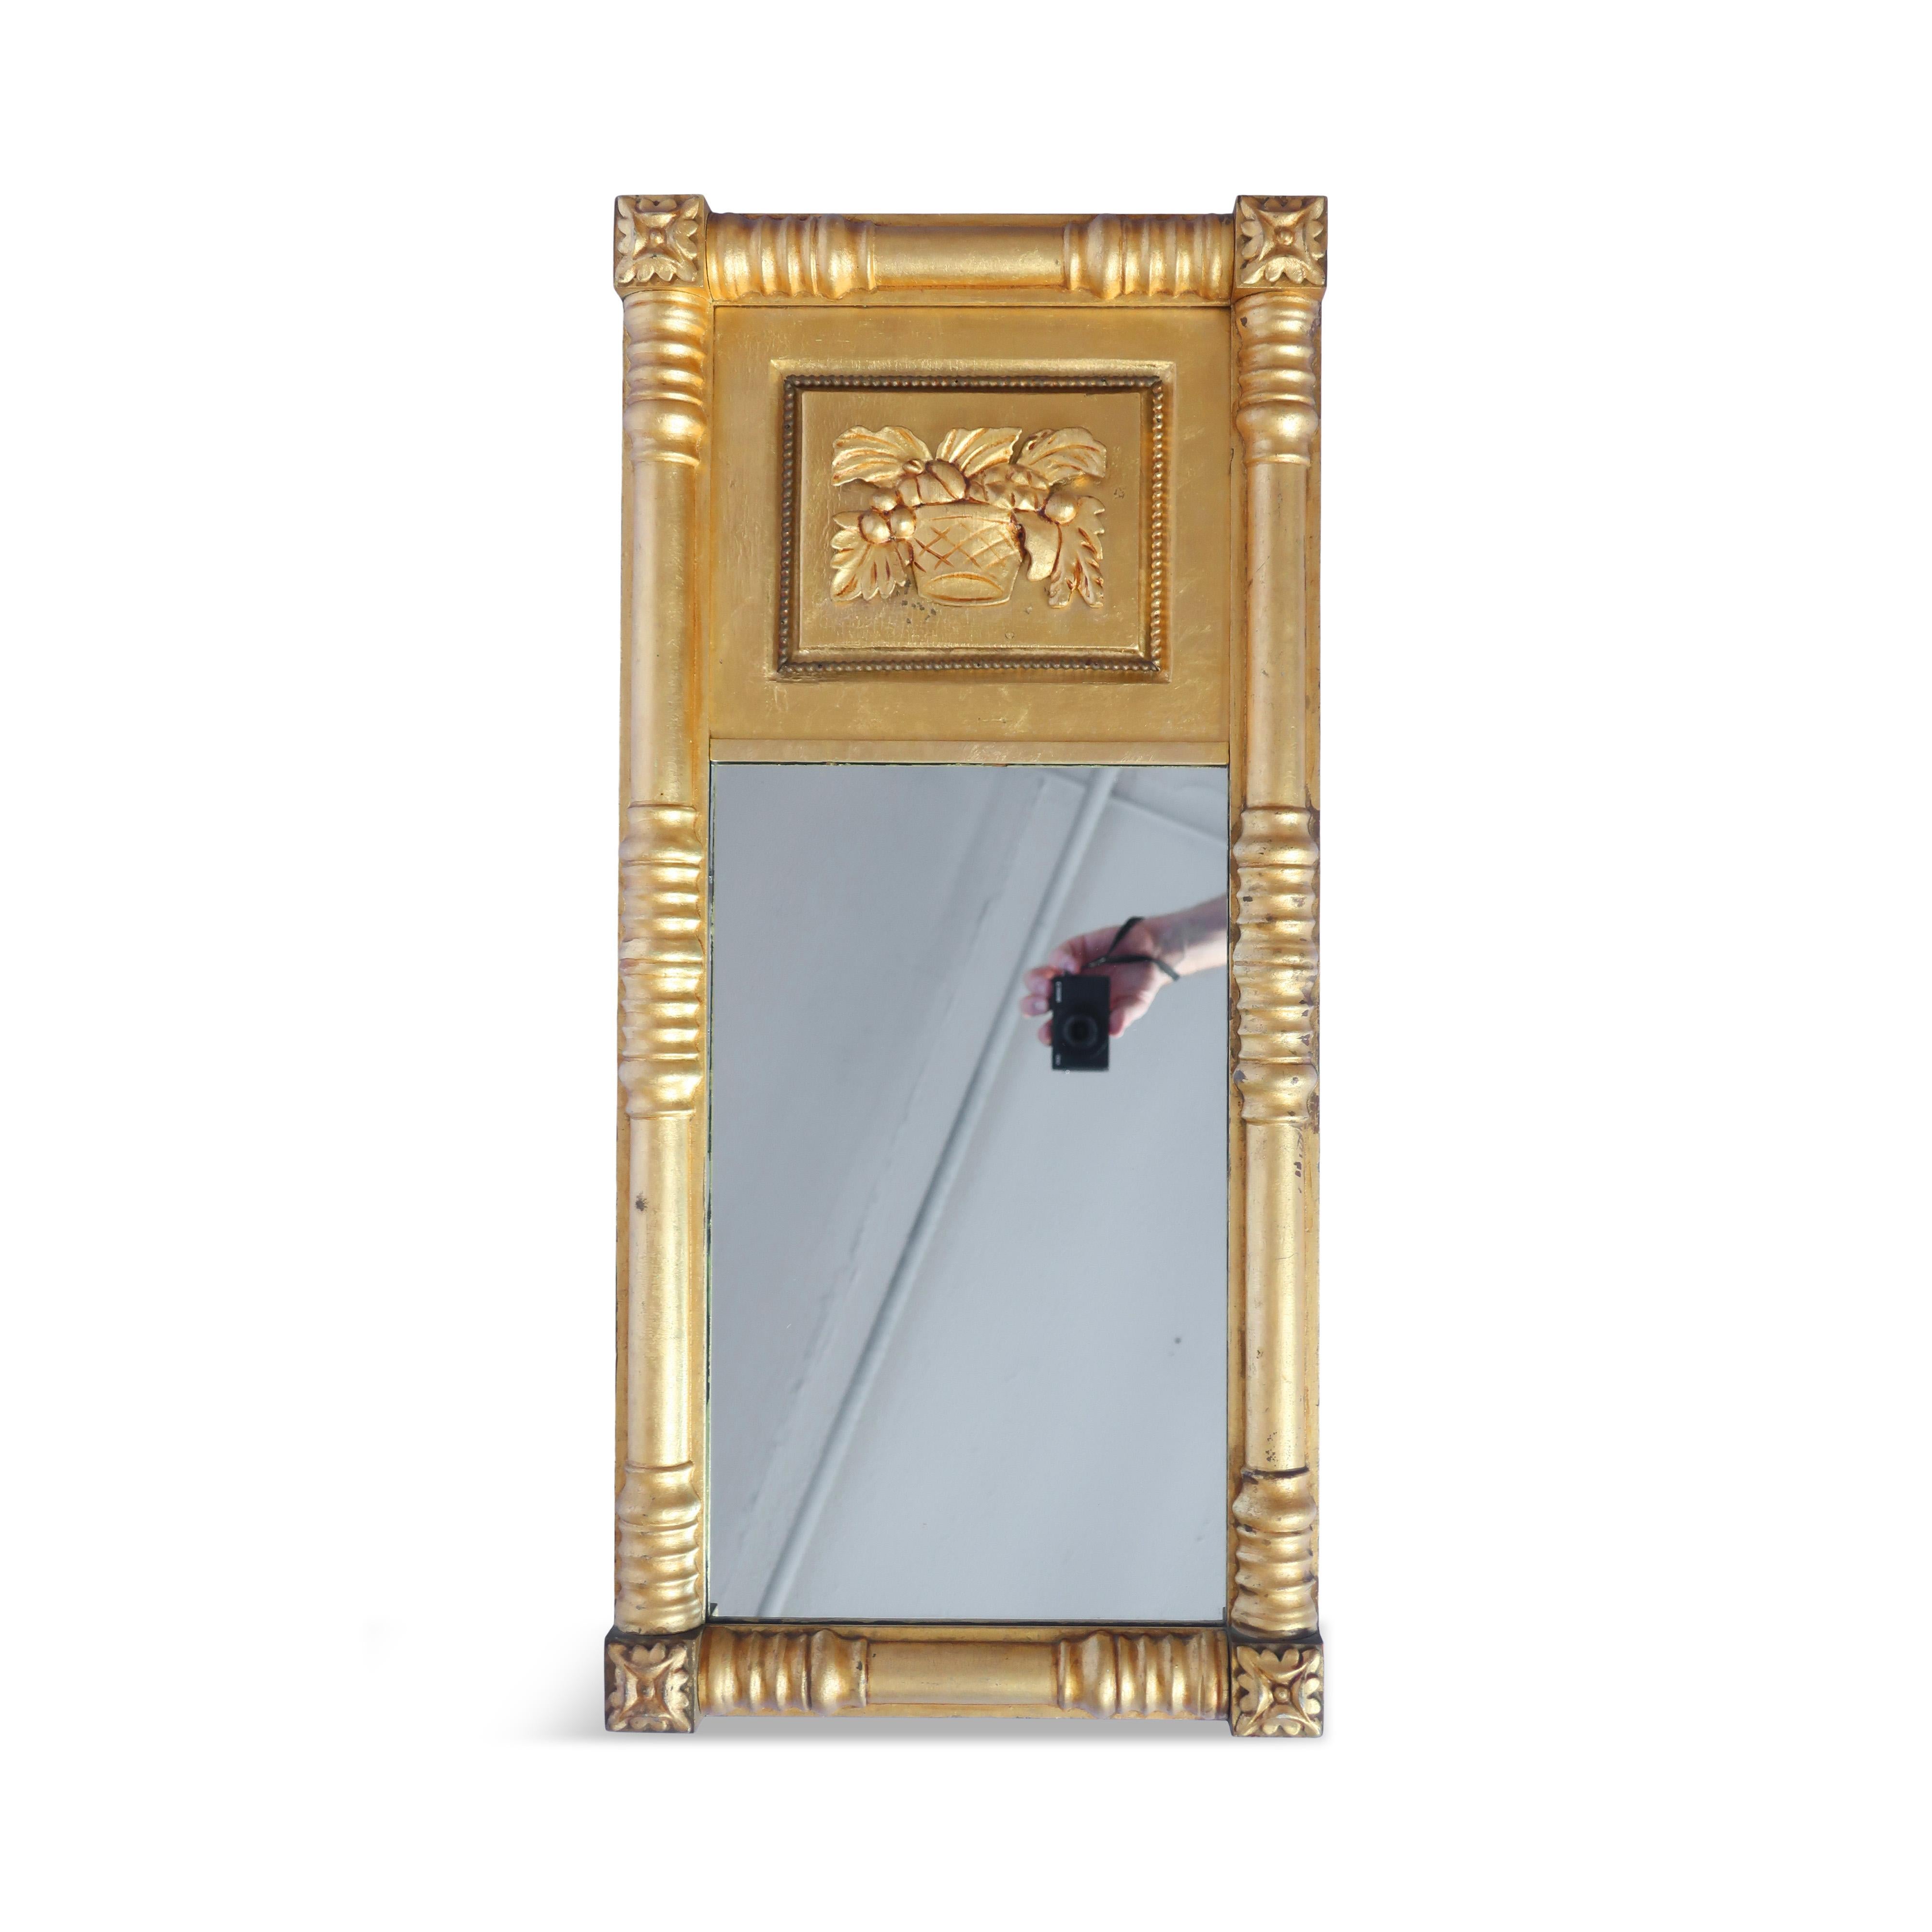 An antique carved giltwood wall mirror from the 1800s featuring a rectangular frame with rosette corners and a basket of fruit panel at the top.  It is made of wood and gilded with gold leaf, giving it a rich and elegant look; it is suitable for